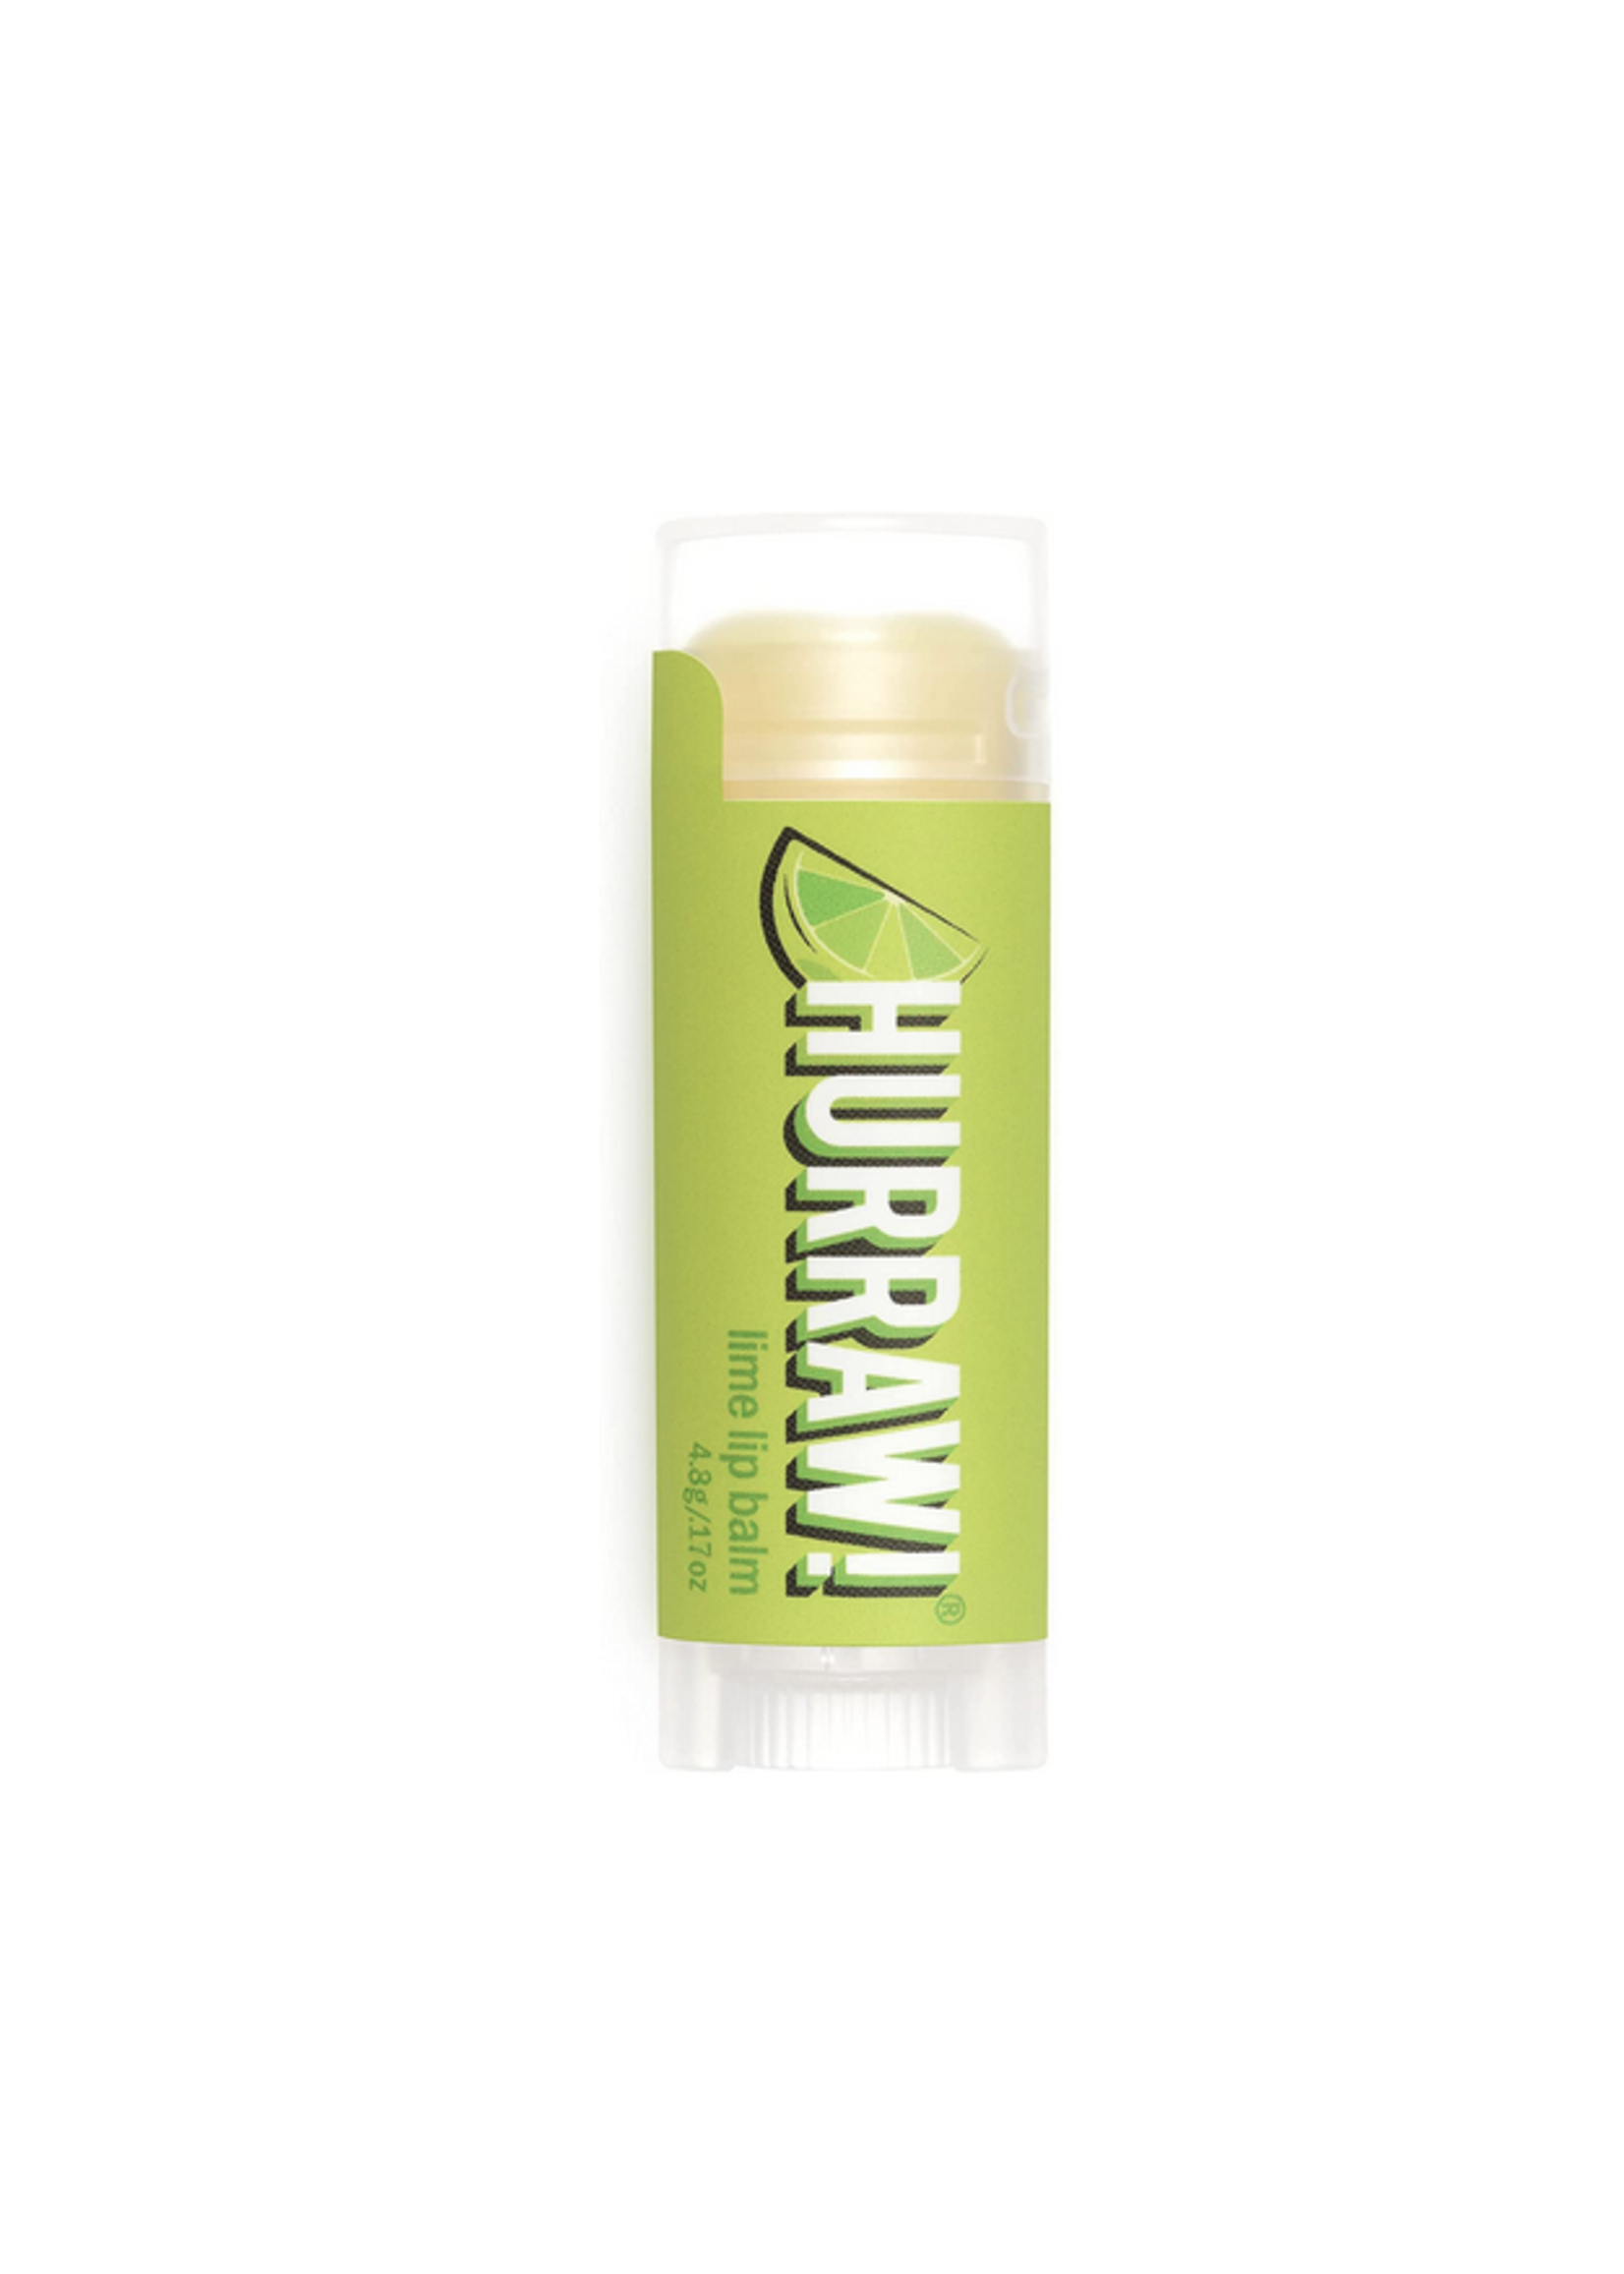 Little Valley Hurraw Lime Lip Balm